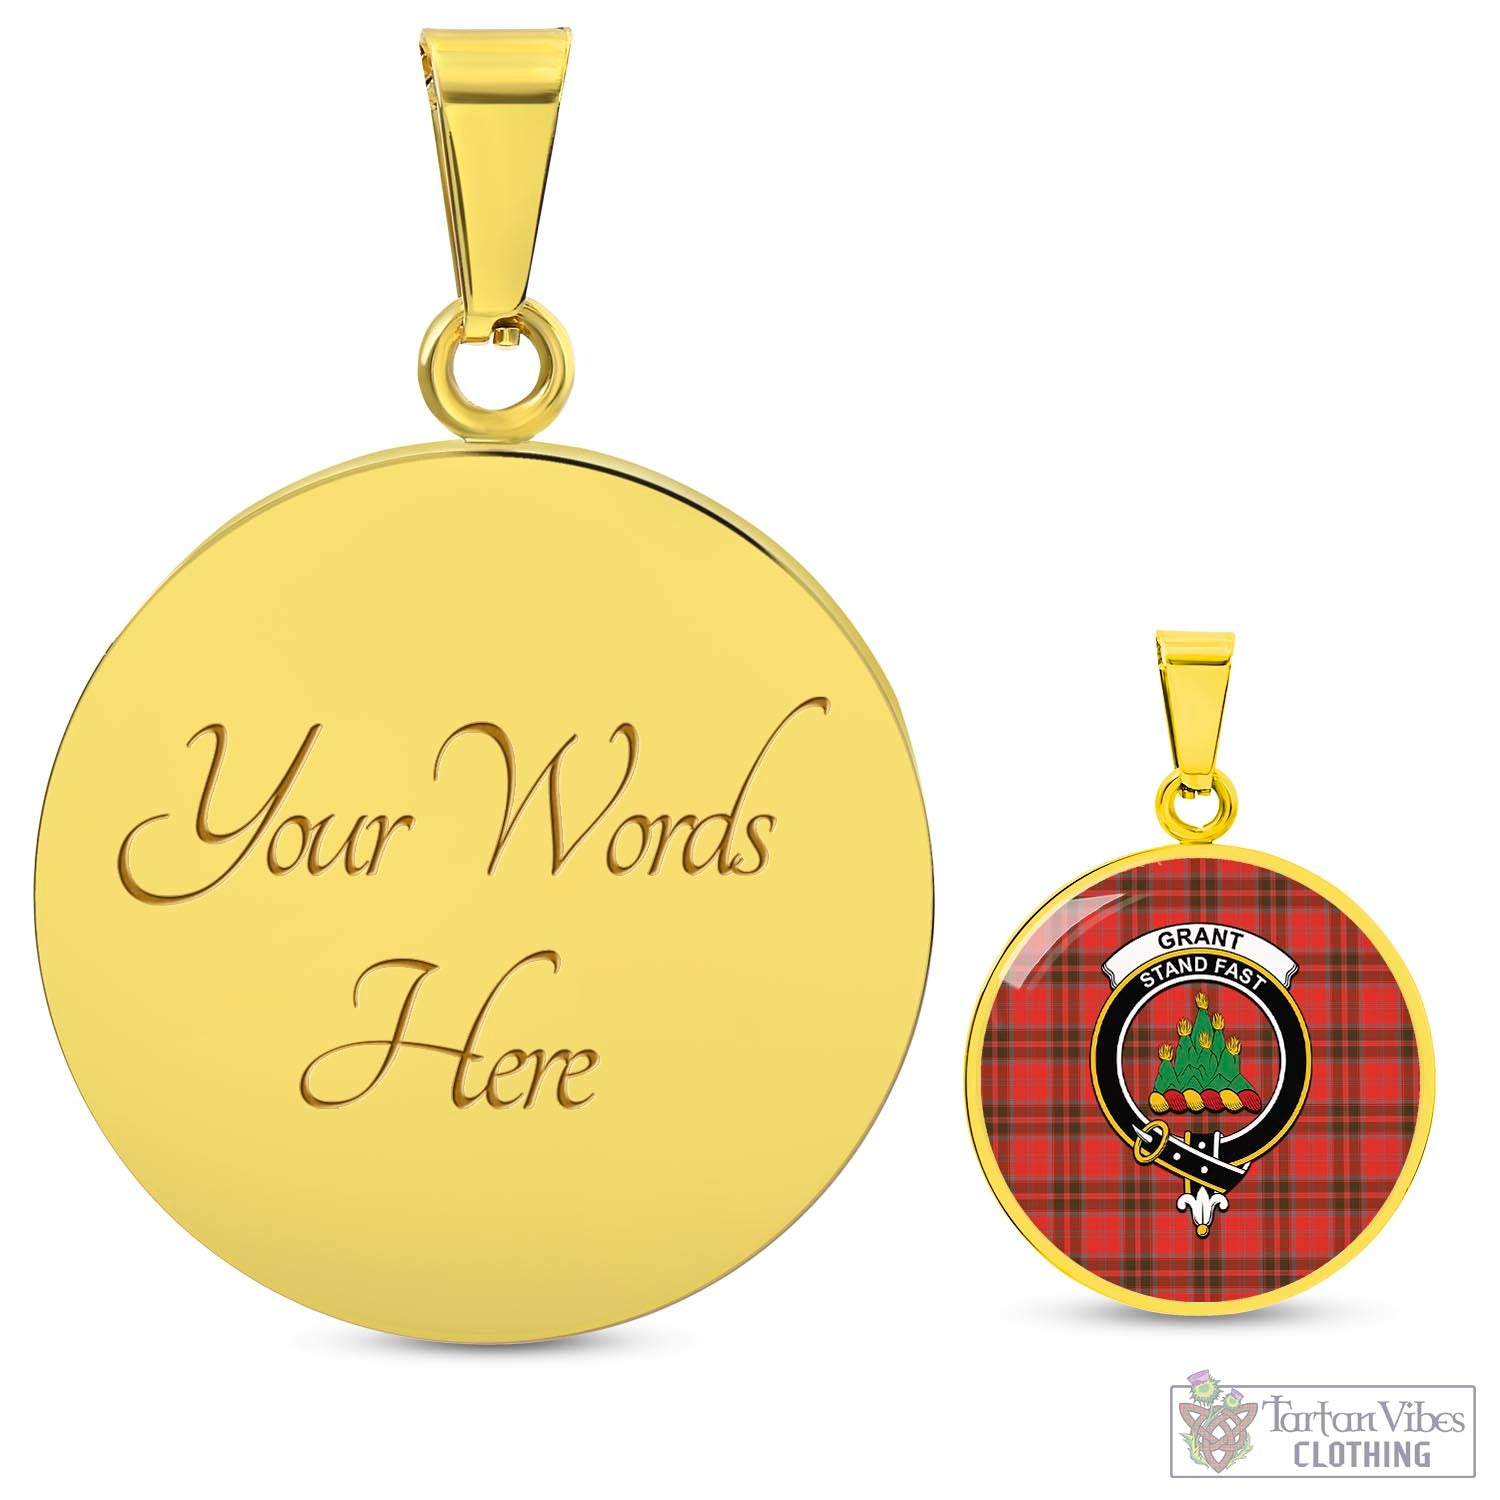 Tartan Vibes Clothing Grant Weathered Tartan Circle Necklace with Family Crest